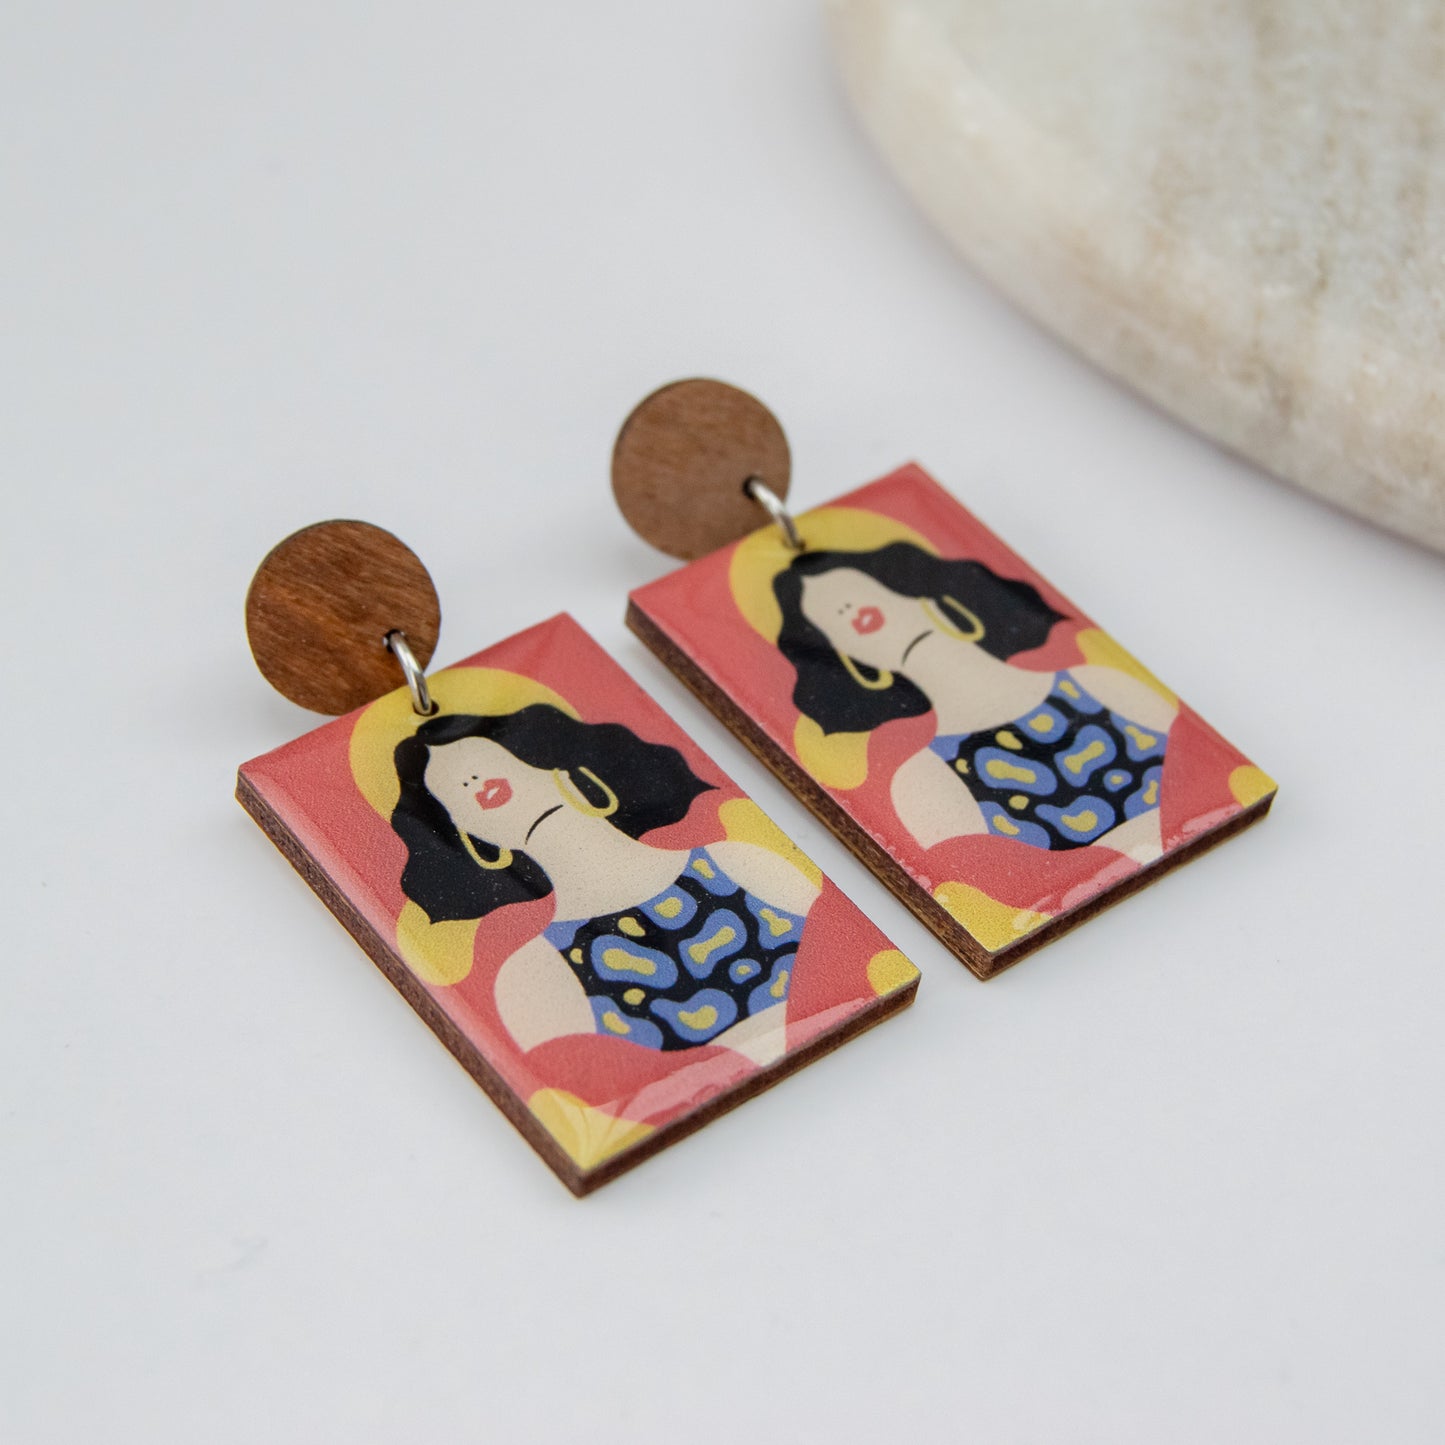 Sofia - Unique wooden statement earrings - Girl Power edition